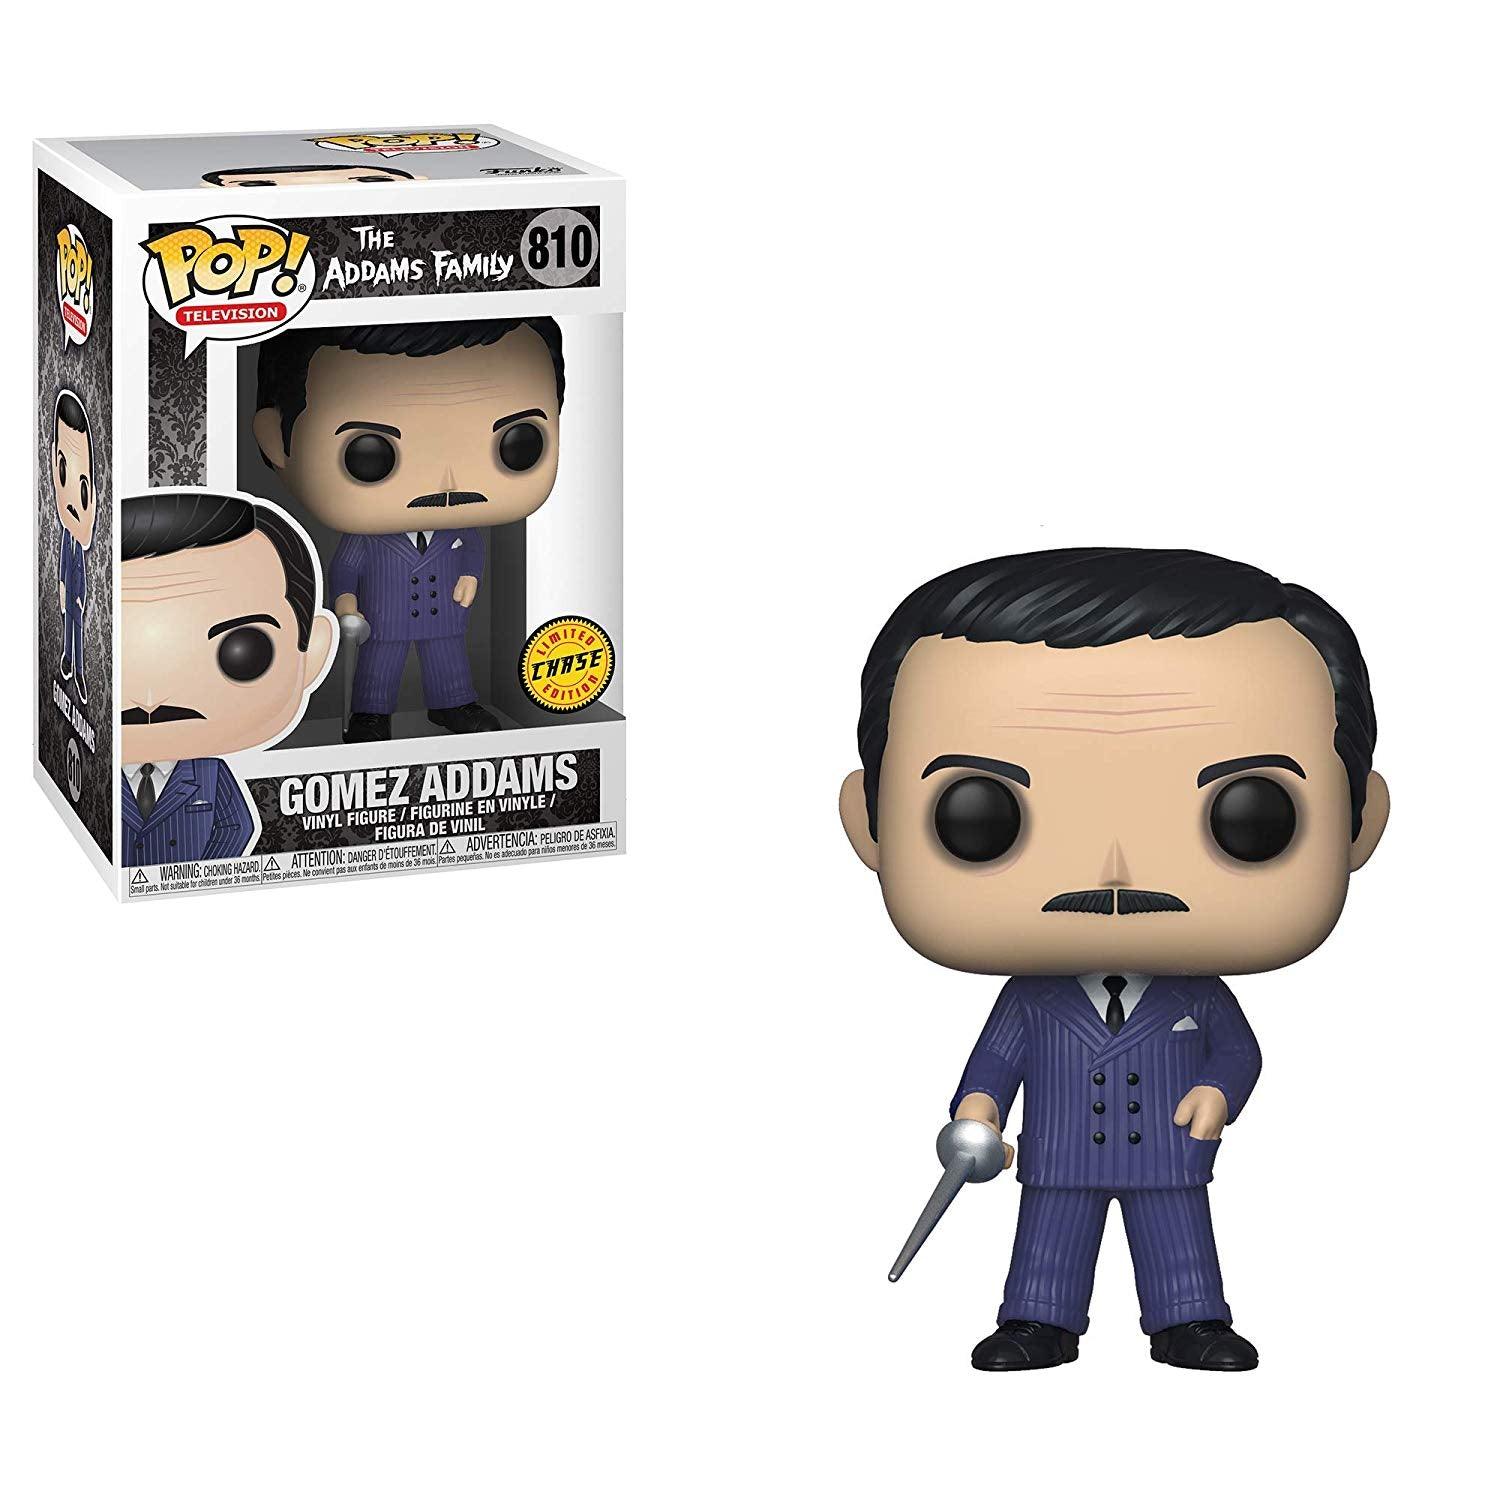 Pop! Television - The Addams Family - Gomez Addams - #810 - LIMITED CHASE Edition - Hobby Champion Inc